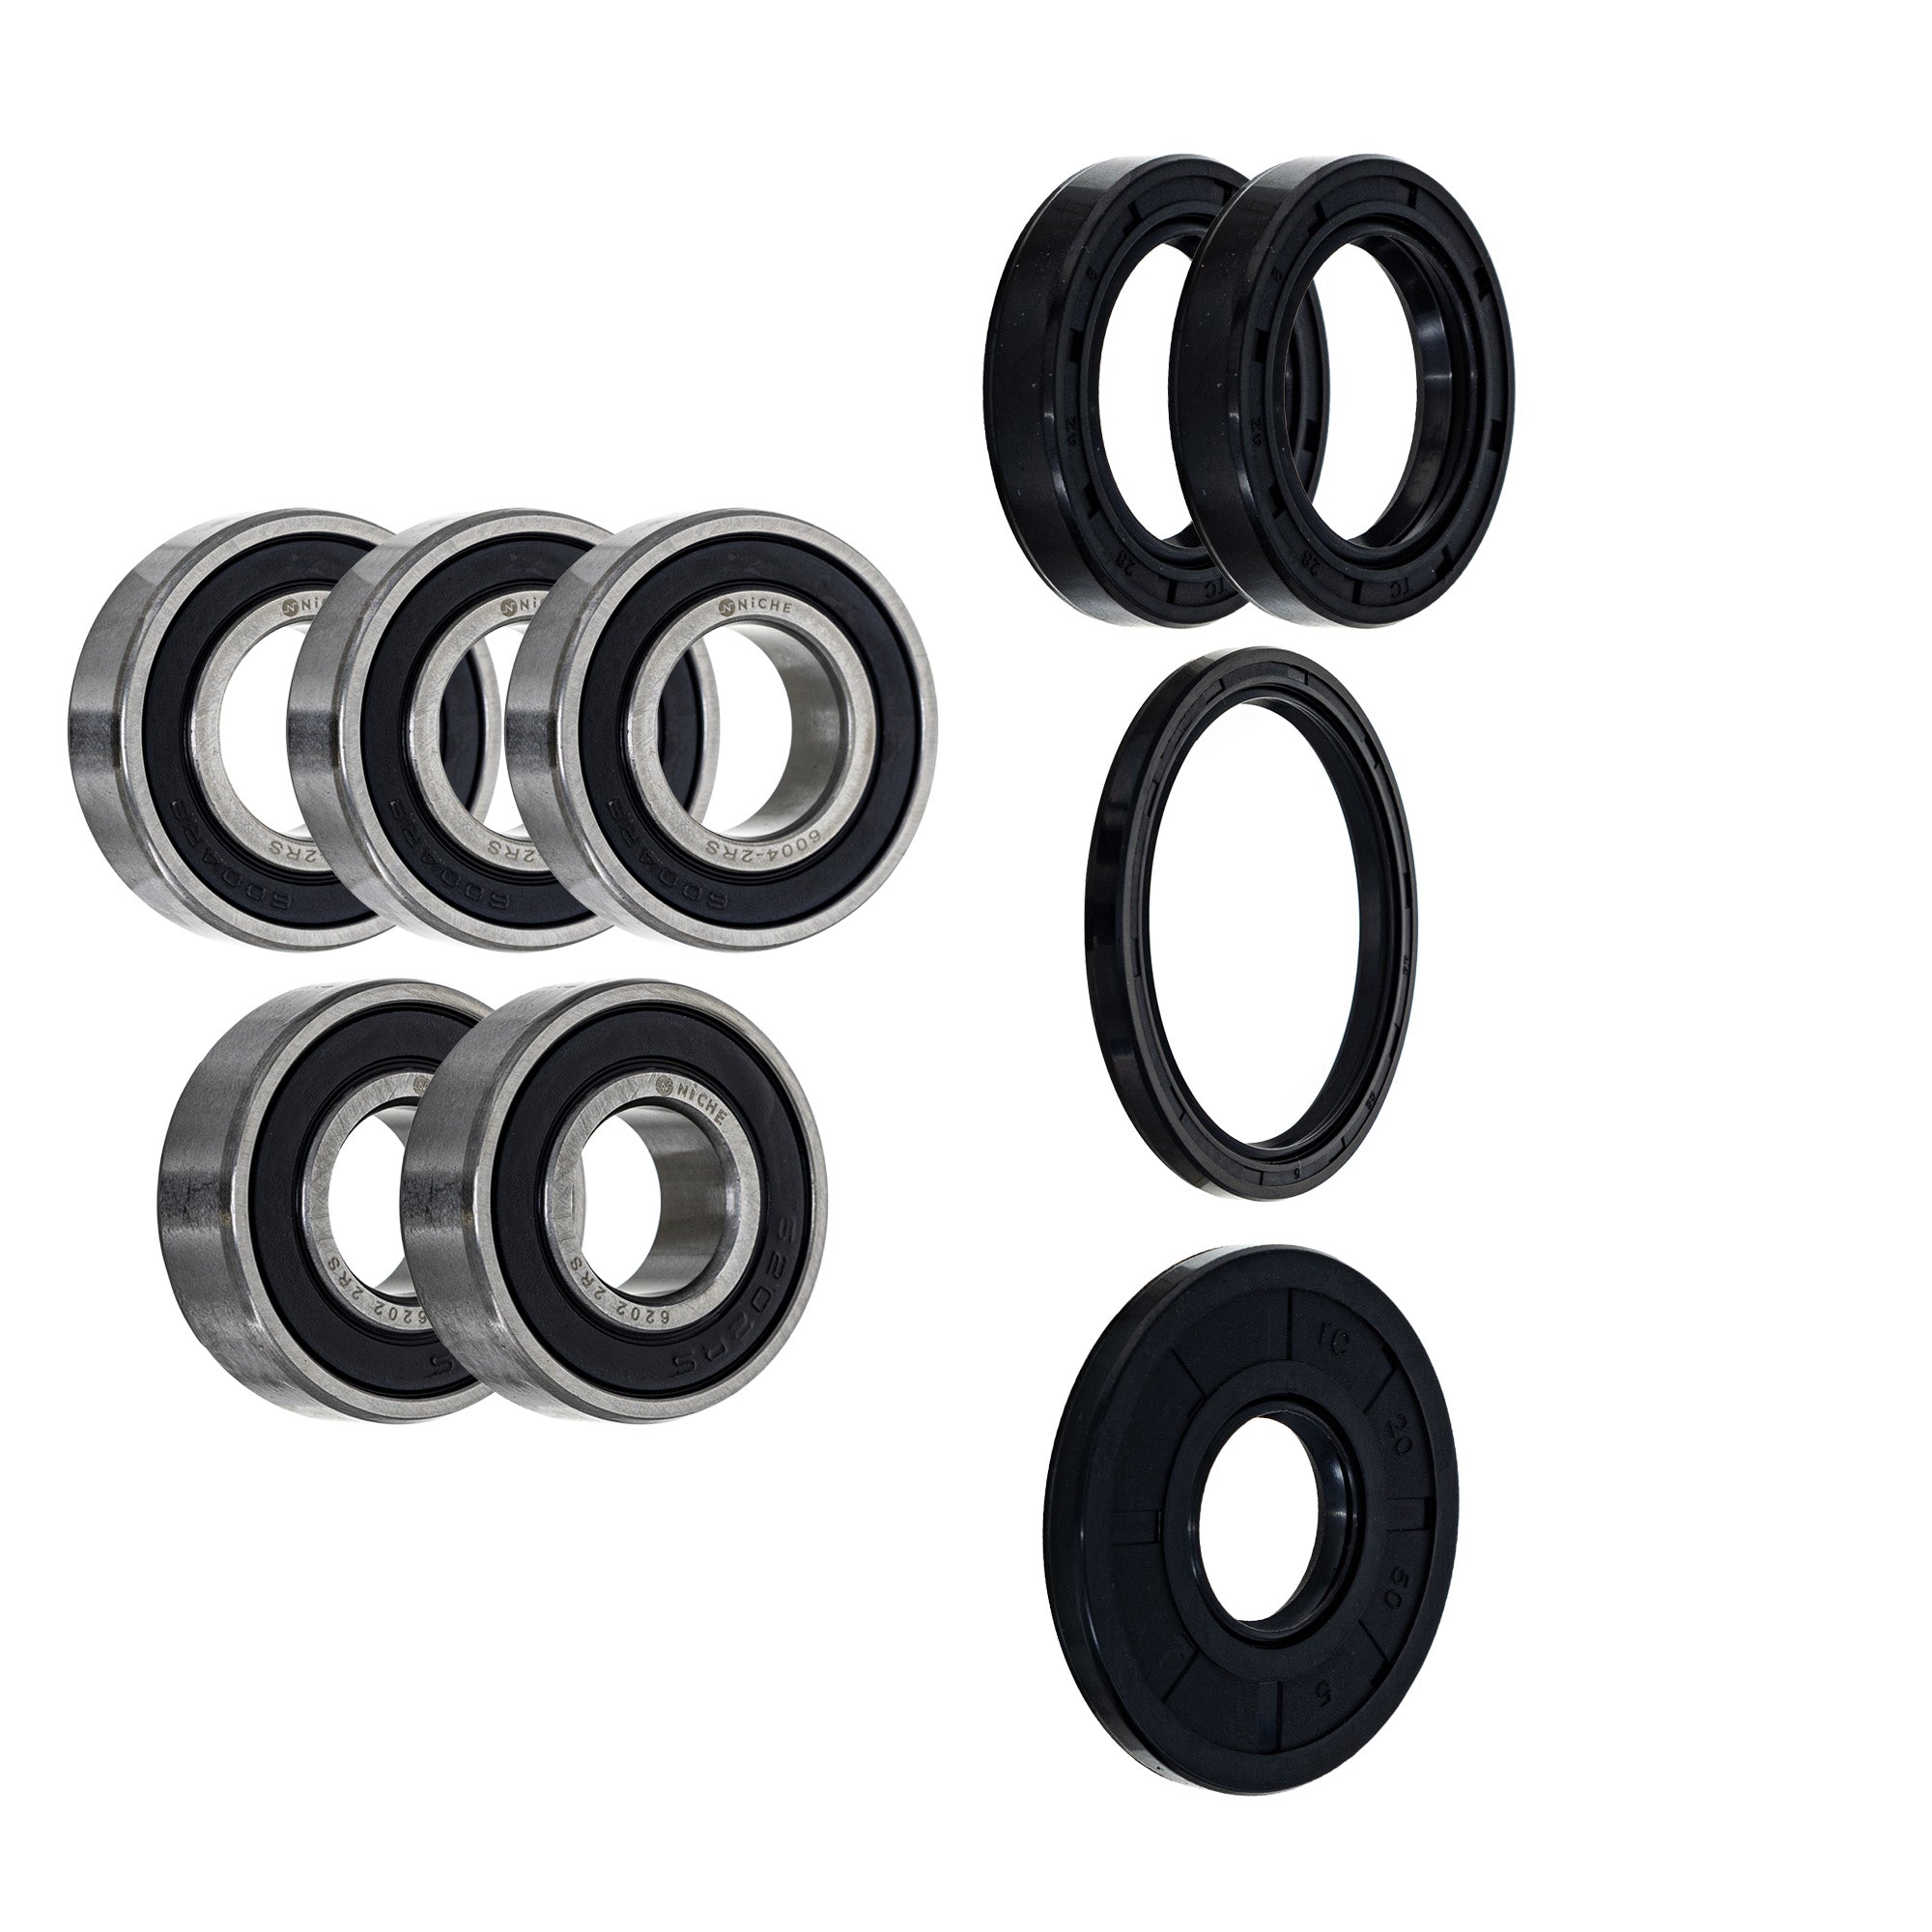 Wheel Bearing Seal Kit for zOTHER Ref No CR480R CR250R CR125R NICHE MK1008796